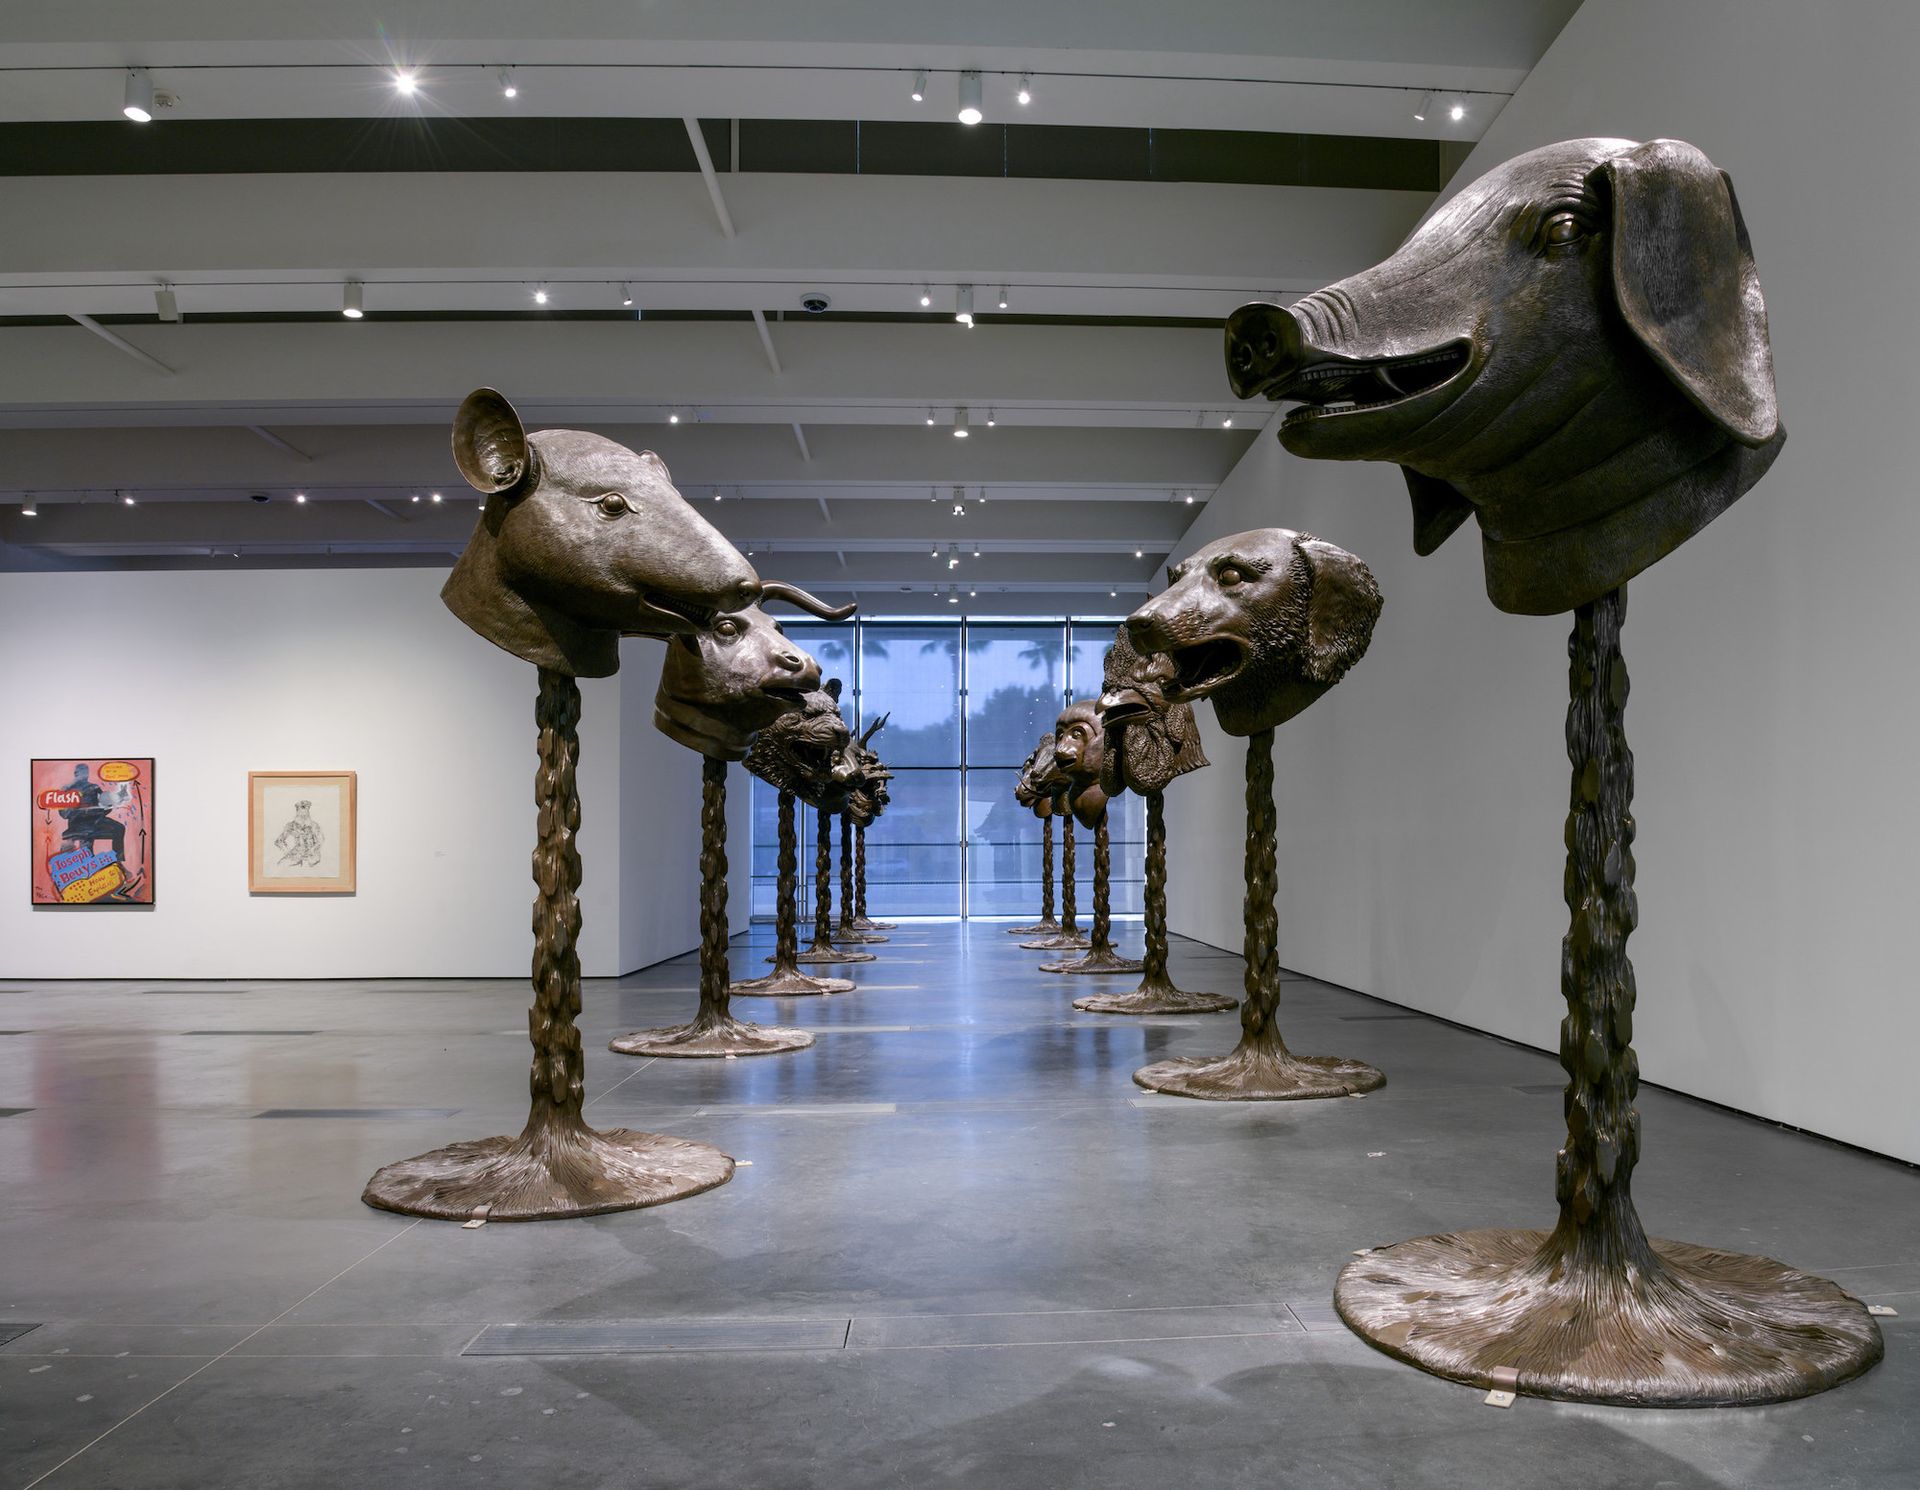 Installation view of Legacies of Exchange: Chinese Contemporary Art from the Yuz Foundation at the Los Angeles County Museum of Art, featuring Circle of Animals/Zodiac Heads (2011) by Ai Weiwei Photo © Museum Associates/LACMA